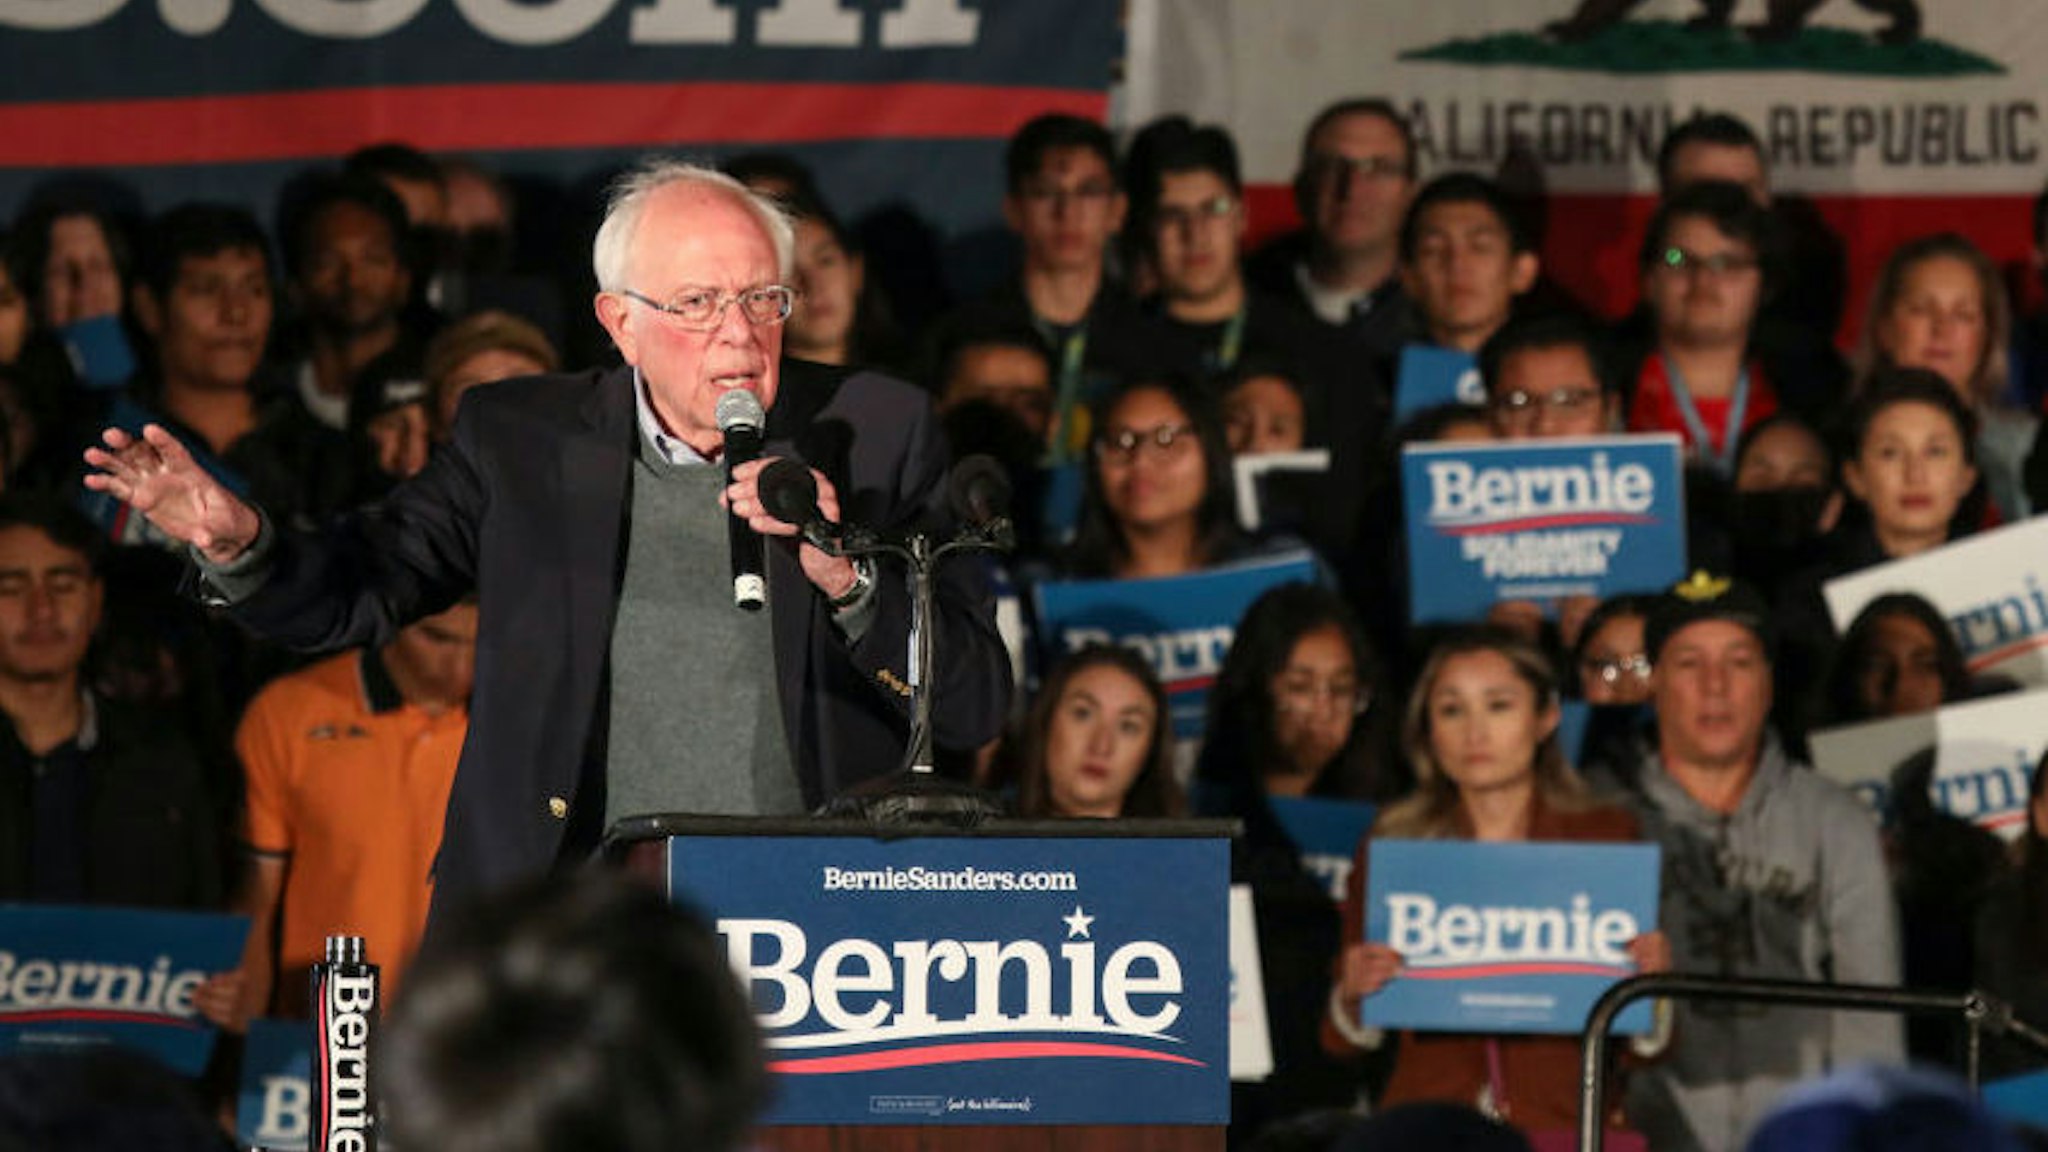 Democratic presidential hopeful Vermont Senator Bernie Sanders Speaks to supporters at an Immigration Town Hall in San Ysidro, California on December 20, 2019 at San Ysidro High School. (Photo by Sandy Huffaker / AFP)